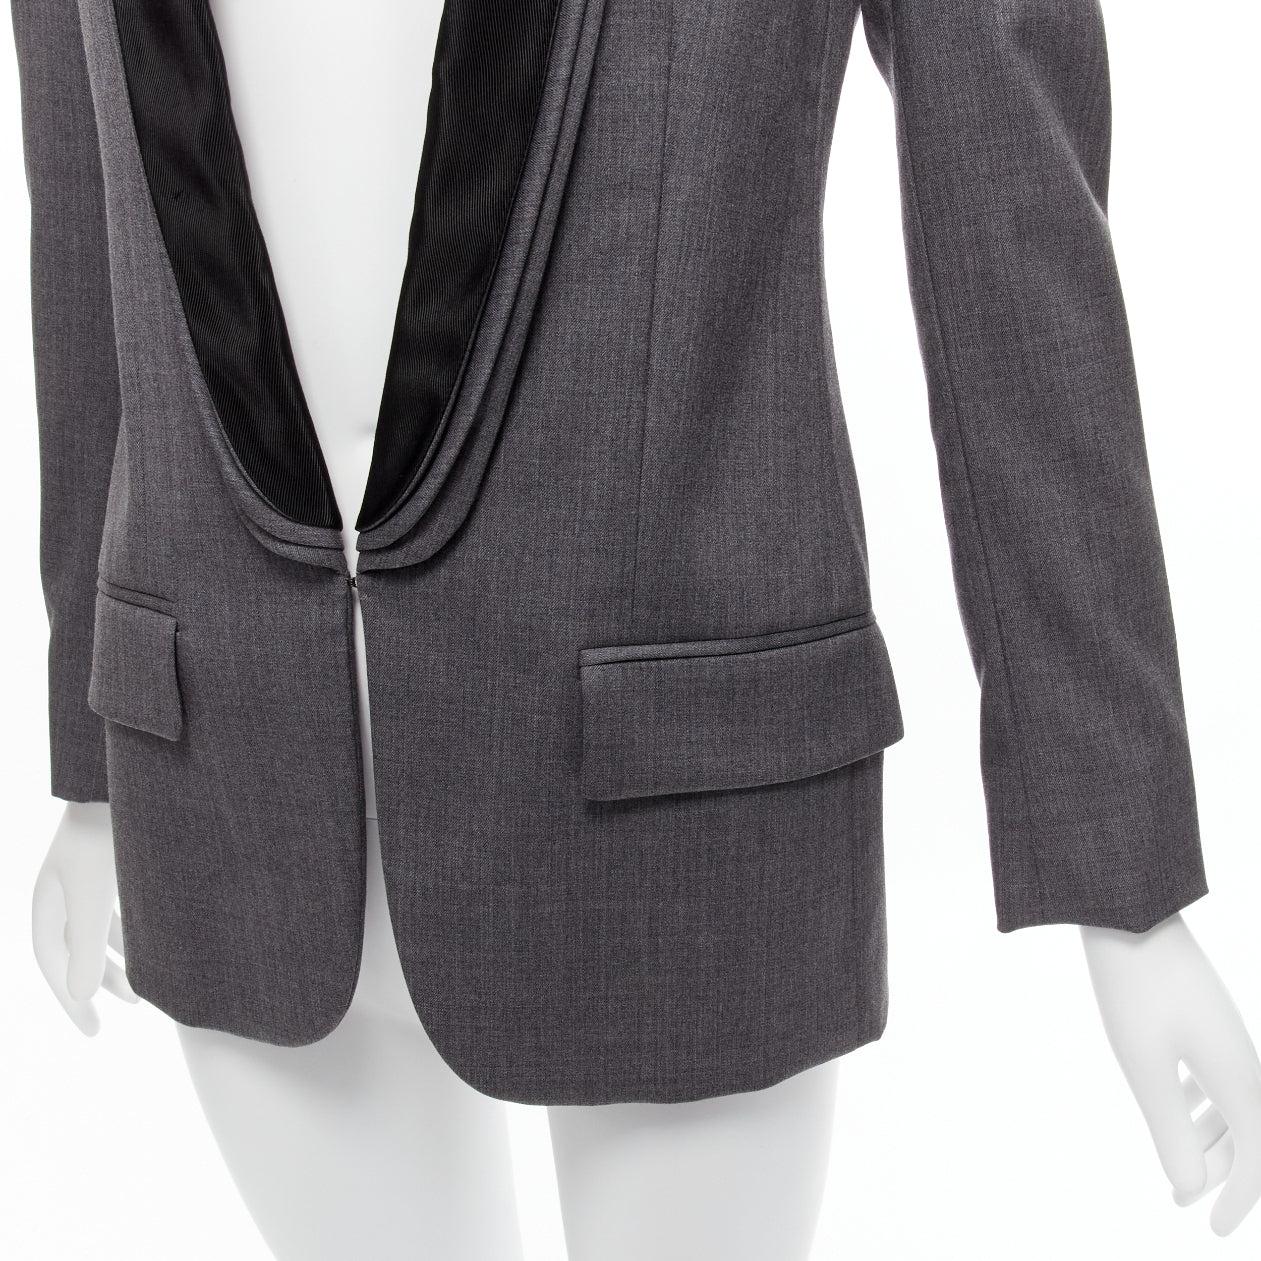 STELLA MCCARTNEY 2011 grey wool triple layer shawl pocketed fitted blazer IT36 XXS
Reference: LNKO/A02177
Brand: Stella McCartney
Designer: Stella McCartney
Collection: 2011
Material: Wool, Viscose
Color: Grey, Black
Pattern: Solid
Closure: Hook &